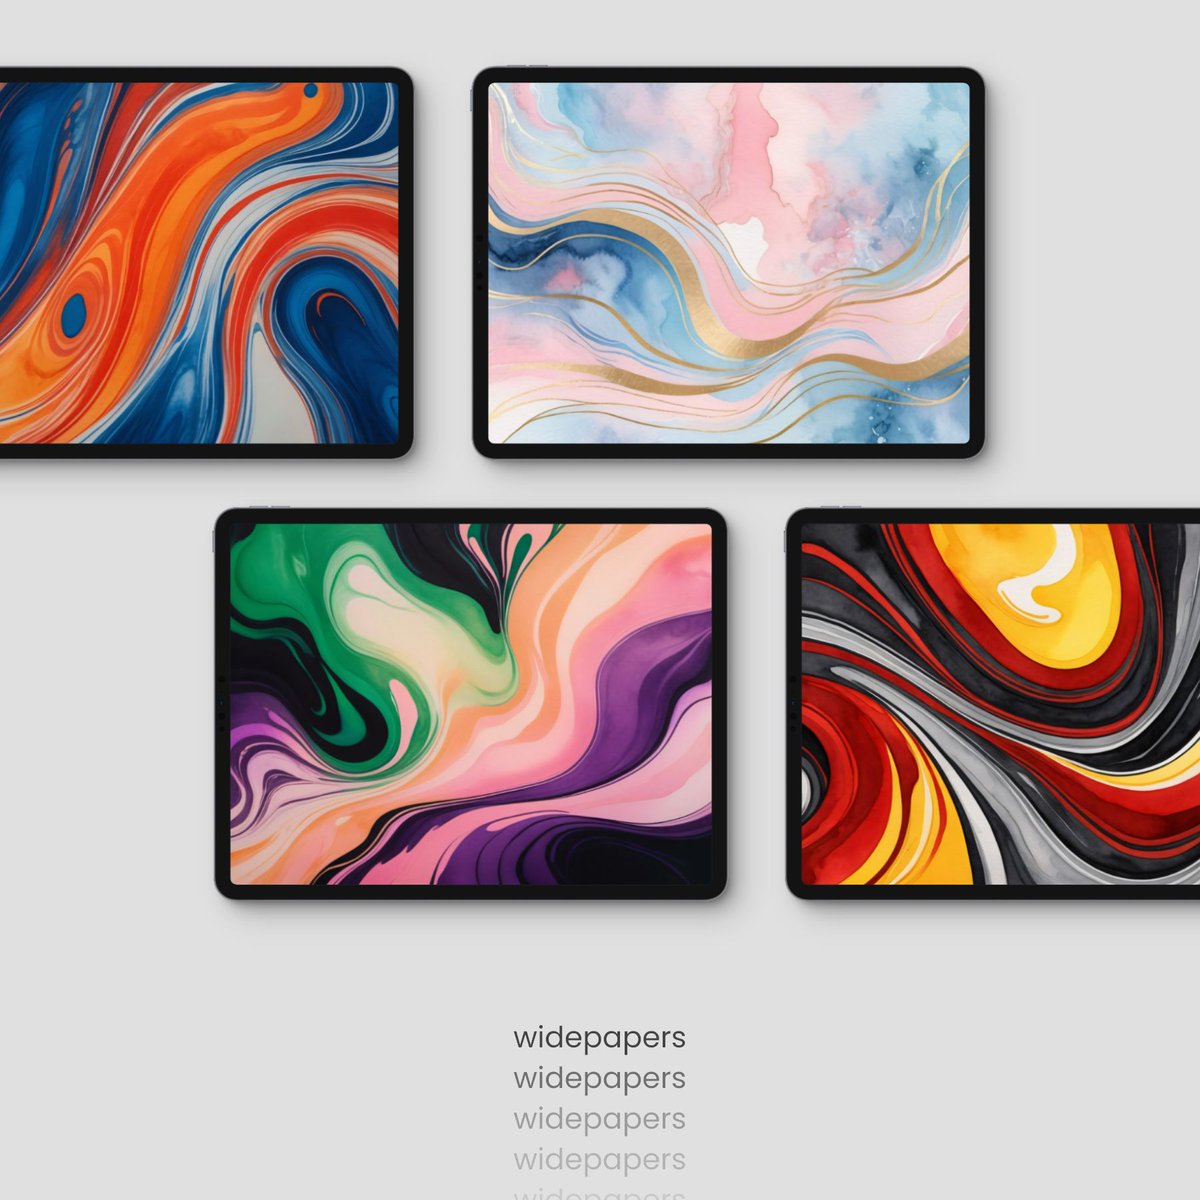 🌟✨ New #Wallpaper Alert! ✨🌟

Widepapers has been updated with these stunning Marbel wallpapers! Elevate your device's screen with these breathtaking backgrounds. 🎨

Download Link
→ bit.ly/widepapers

Transform your screen, unleash your style
#WallpaperWednesday ️🔥